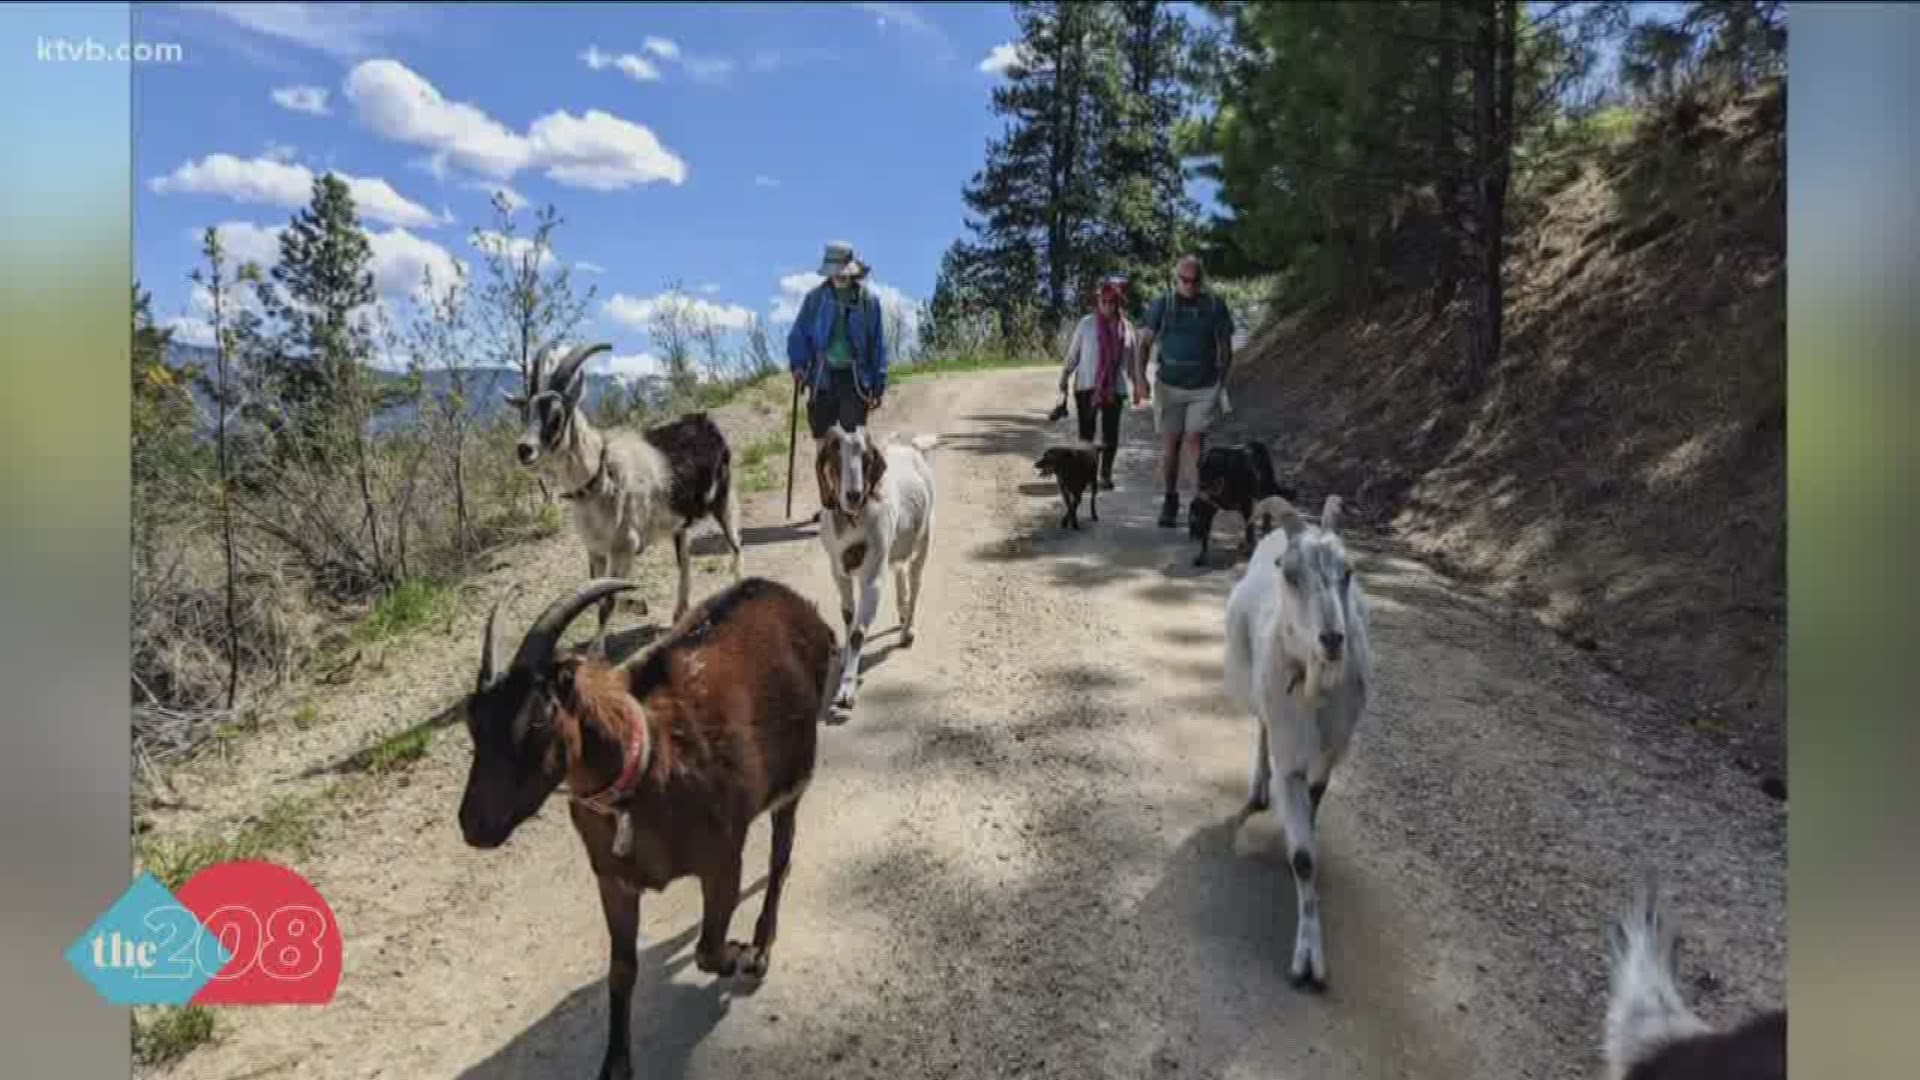 Meet an Idaho City couple that likes to go for long walks with their five goats.